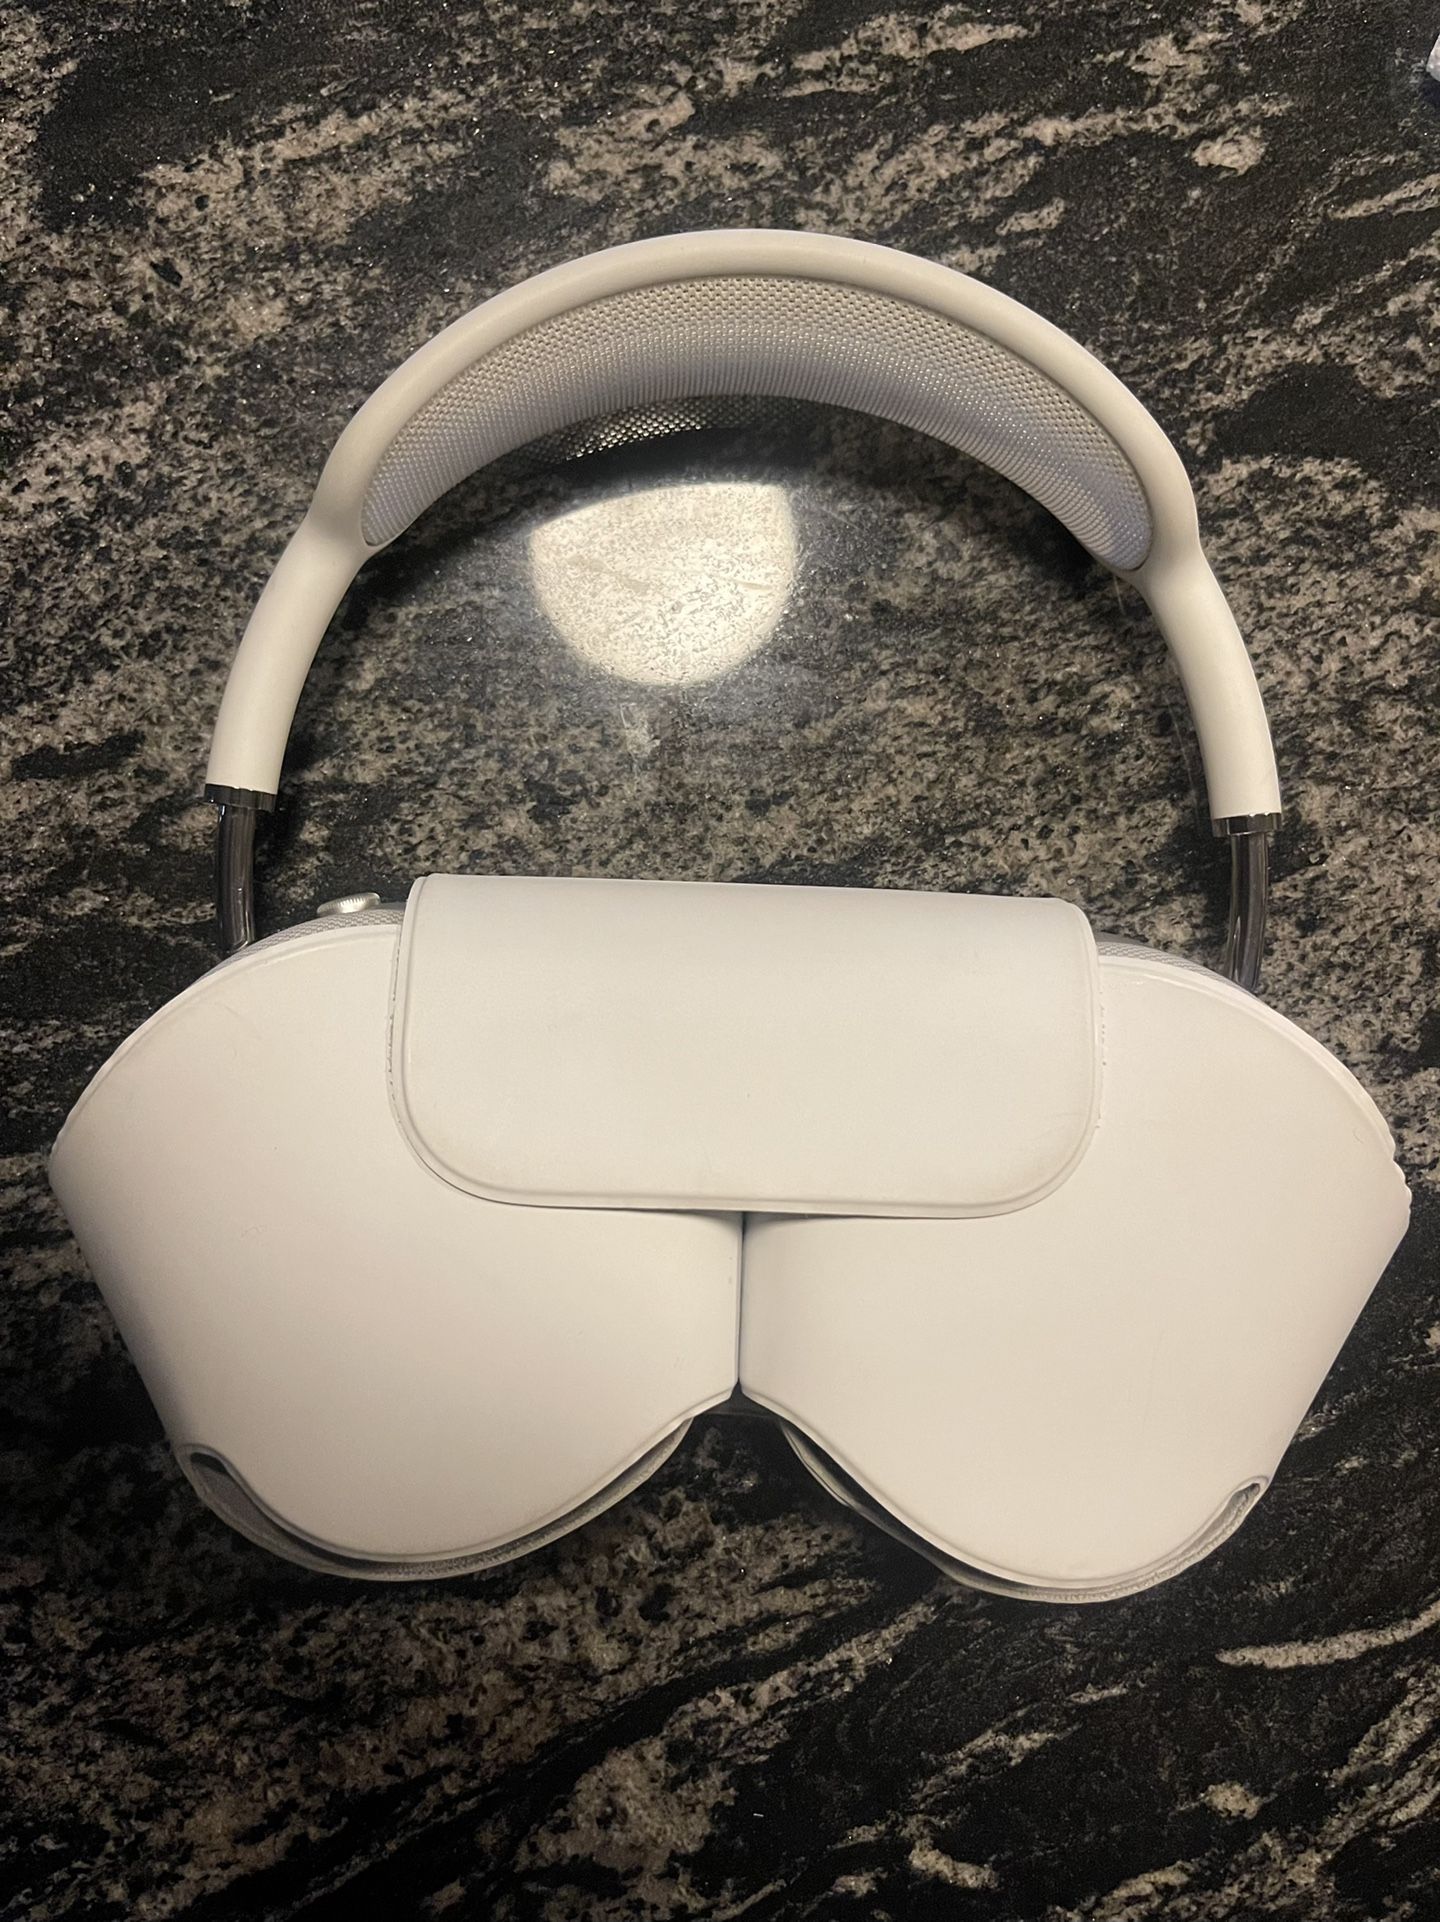 Apple AirPods Max (3 weeks old- Brand new)